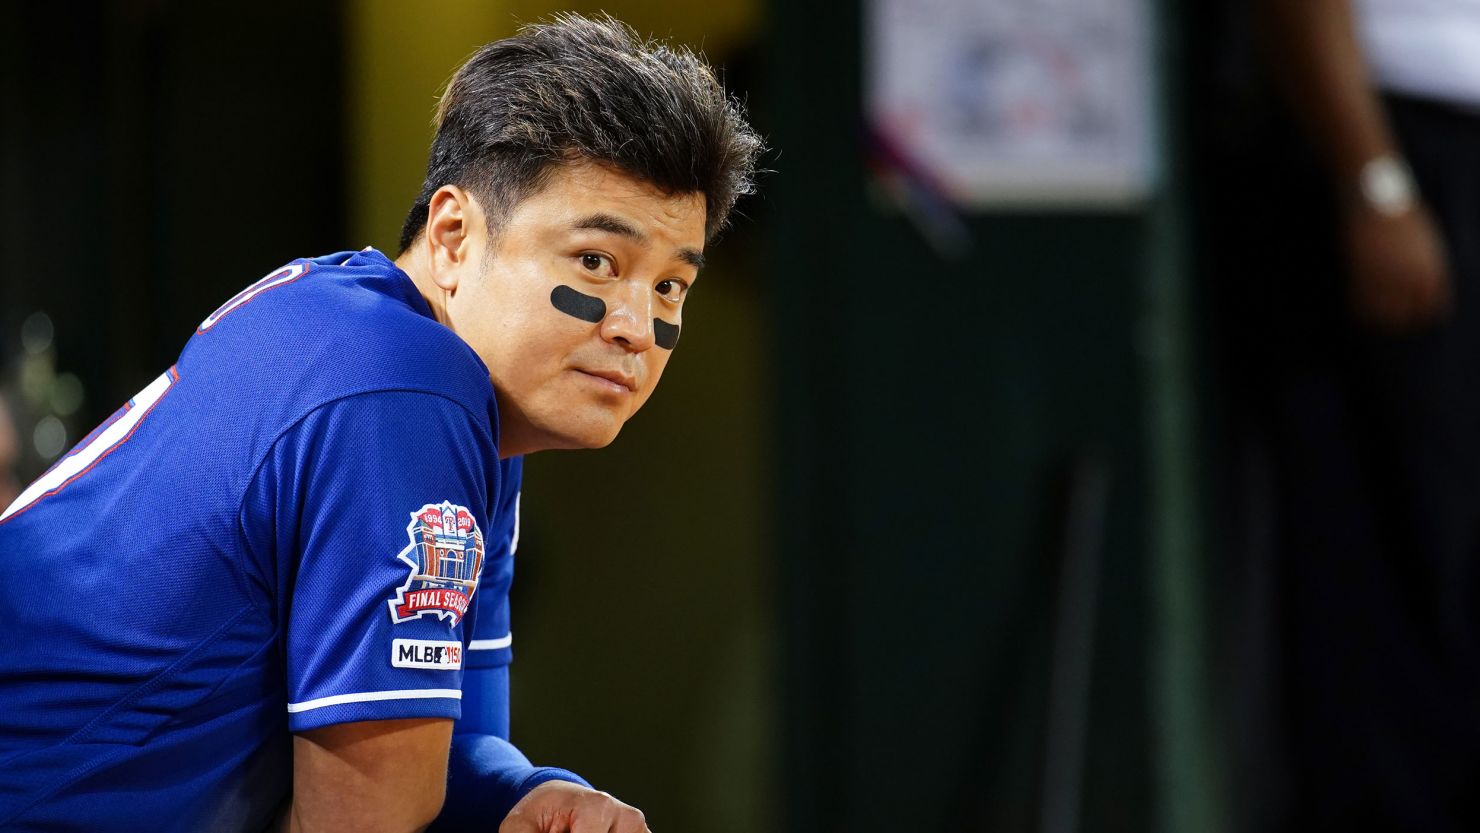 Shin-Soo Choo of the Texas Rangers looks on from the dugout during the eighth inning against the Oakland Athletics on September 20, 2019 in Oakland, California.